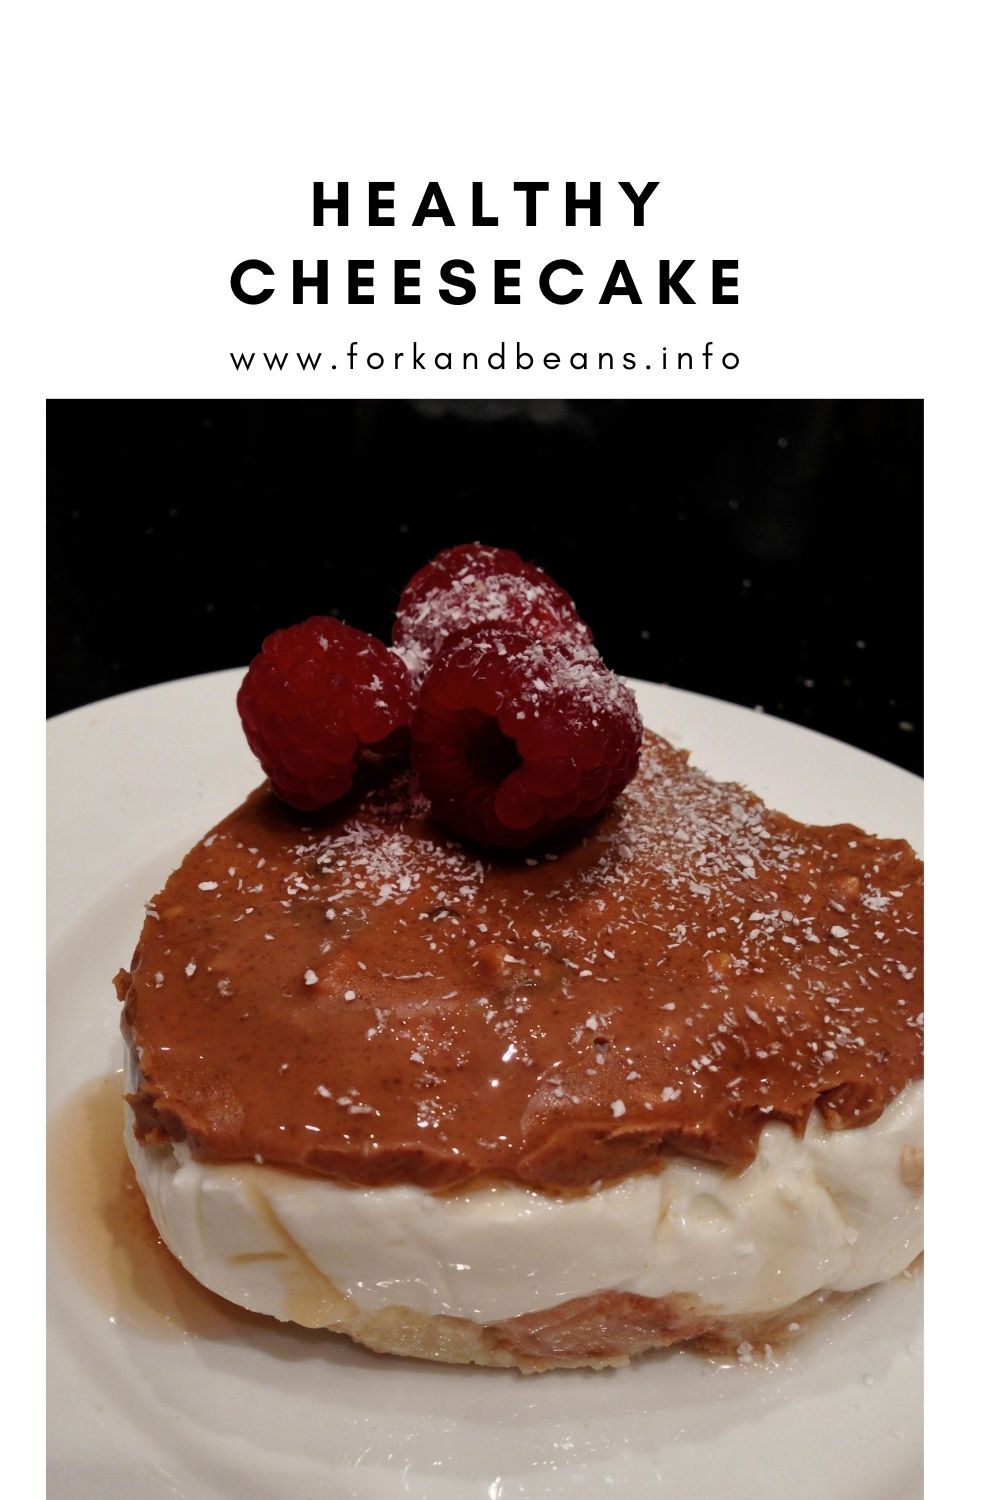 Quest Healthy Cheesecake